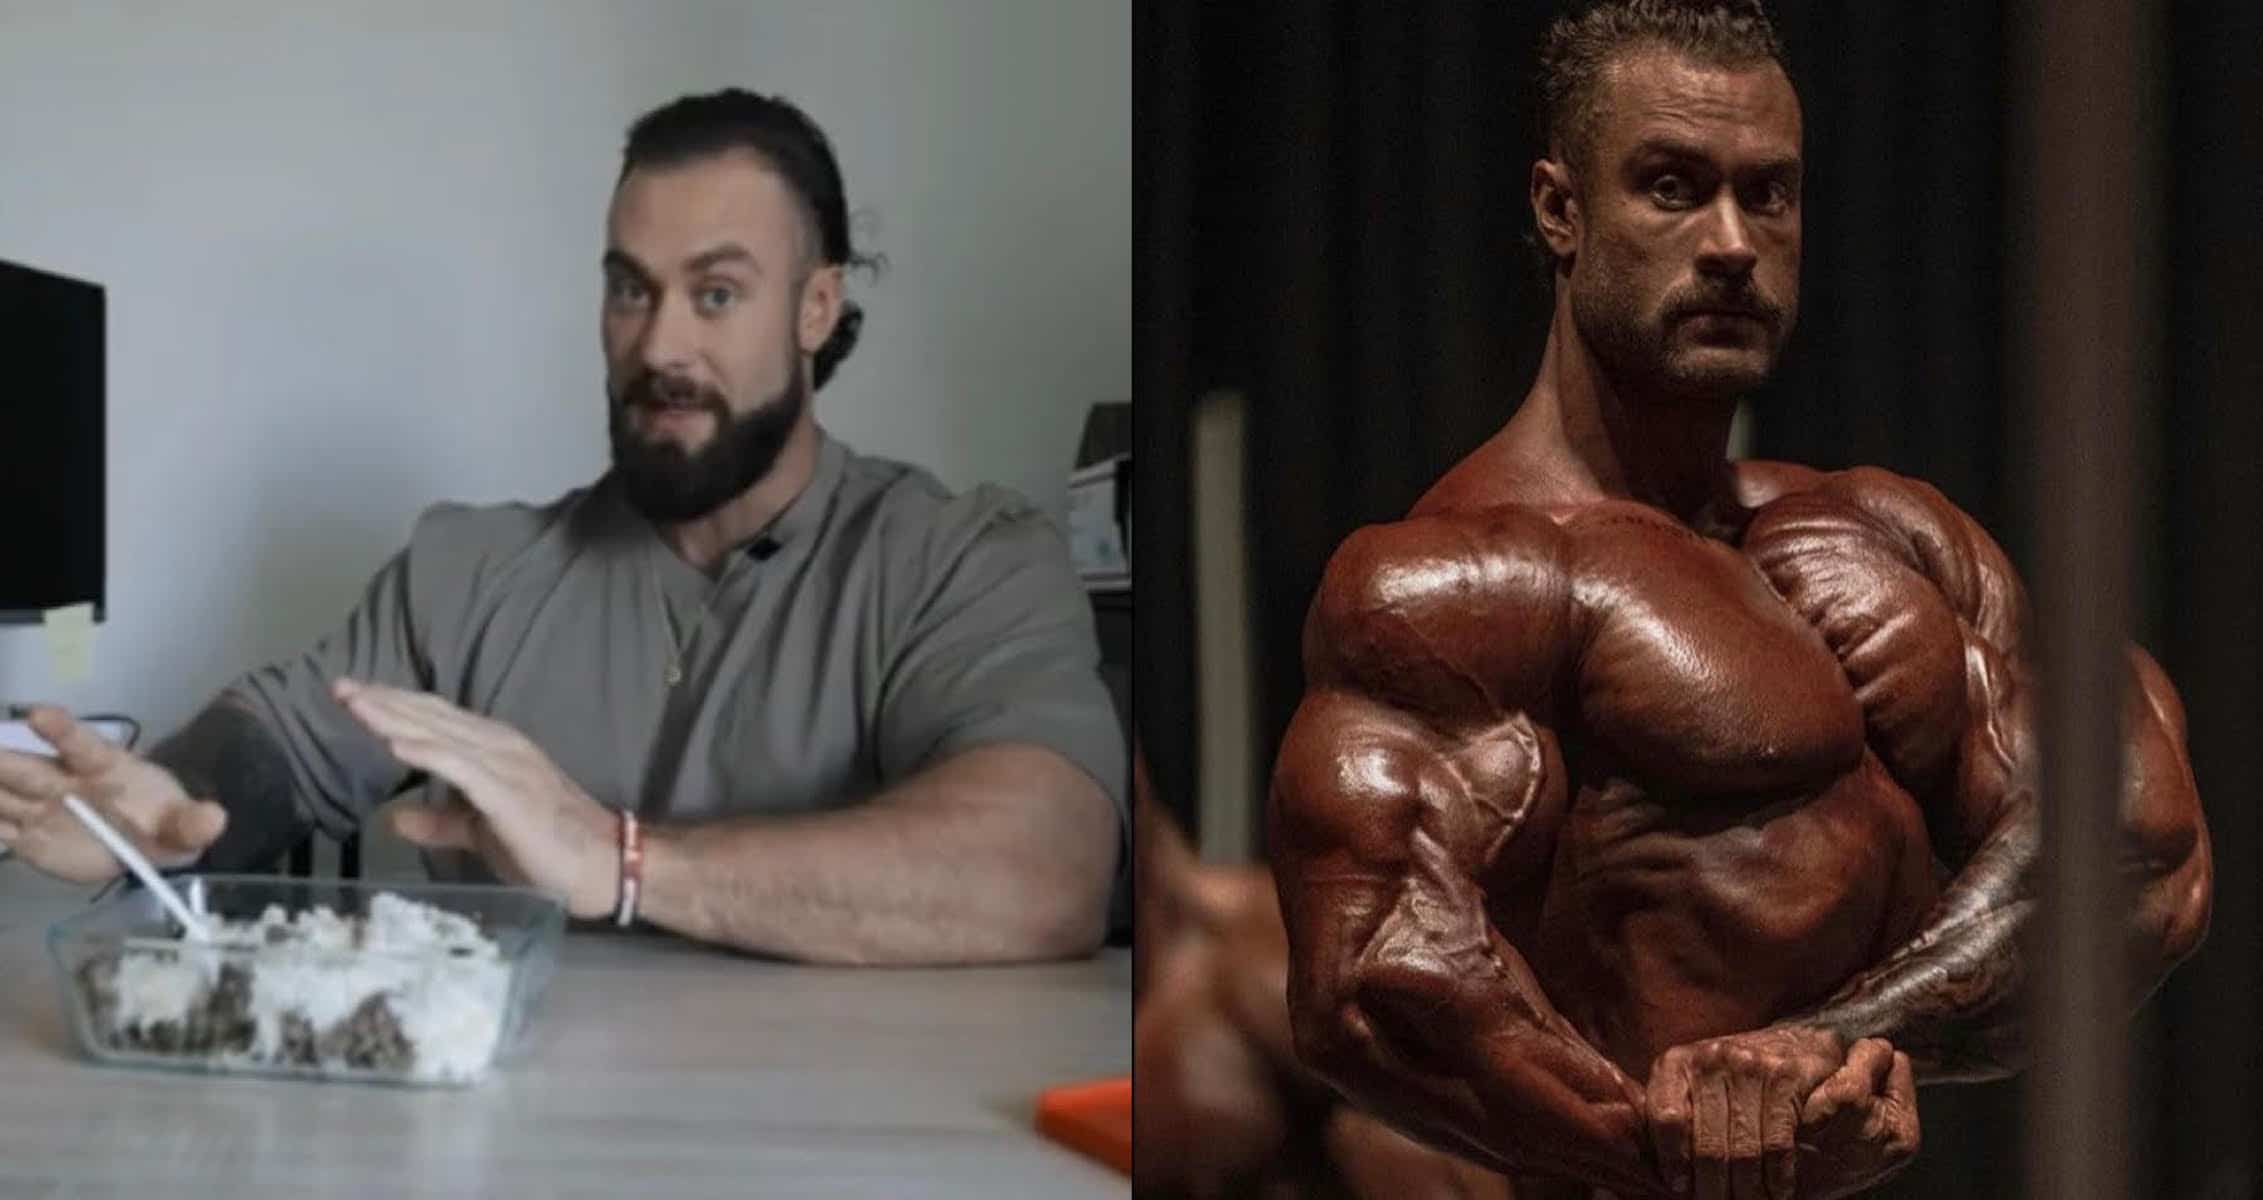 Chris Bumstead Discusses Recent Cycle, Health In Bodybuilding: 'Very Low  Dose On My Supplements That I've Been Doing'